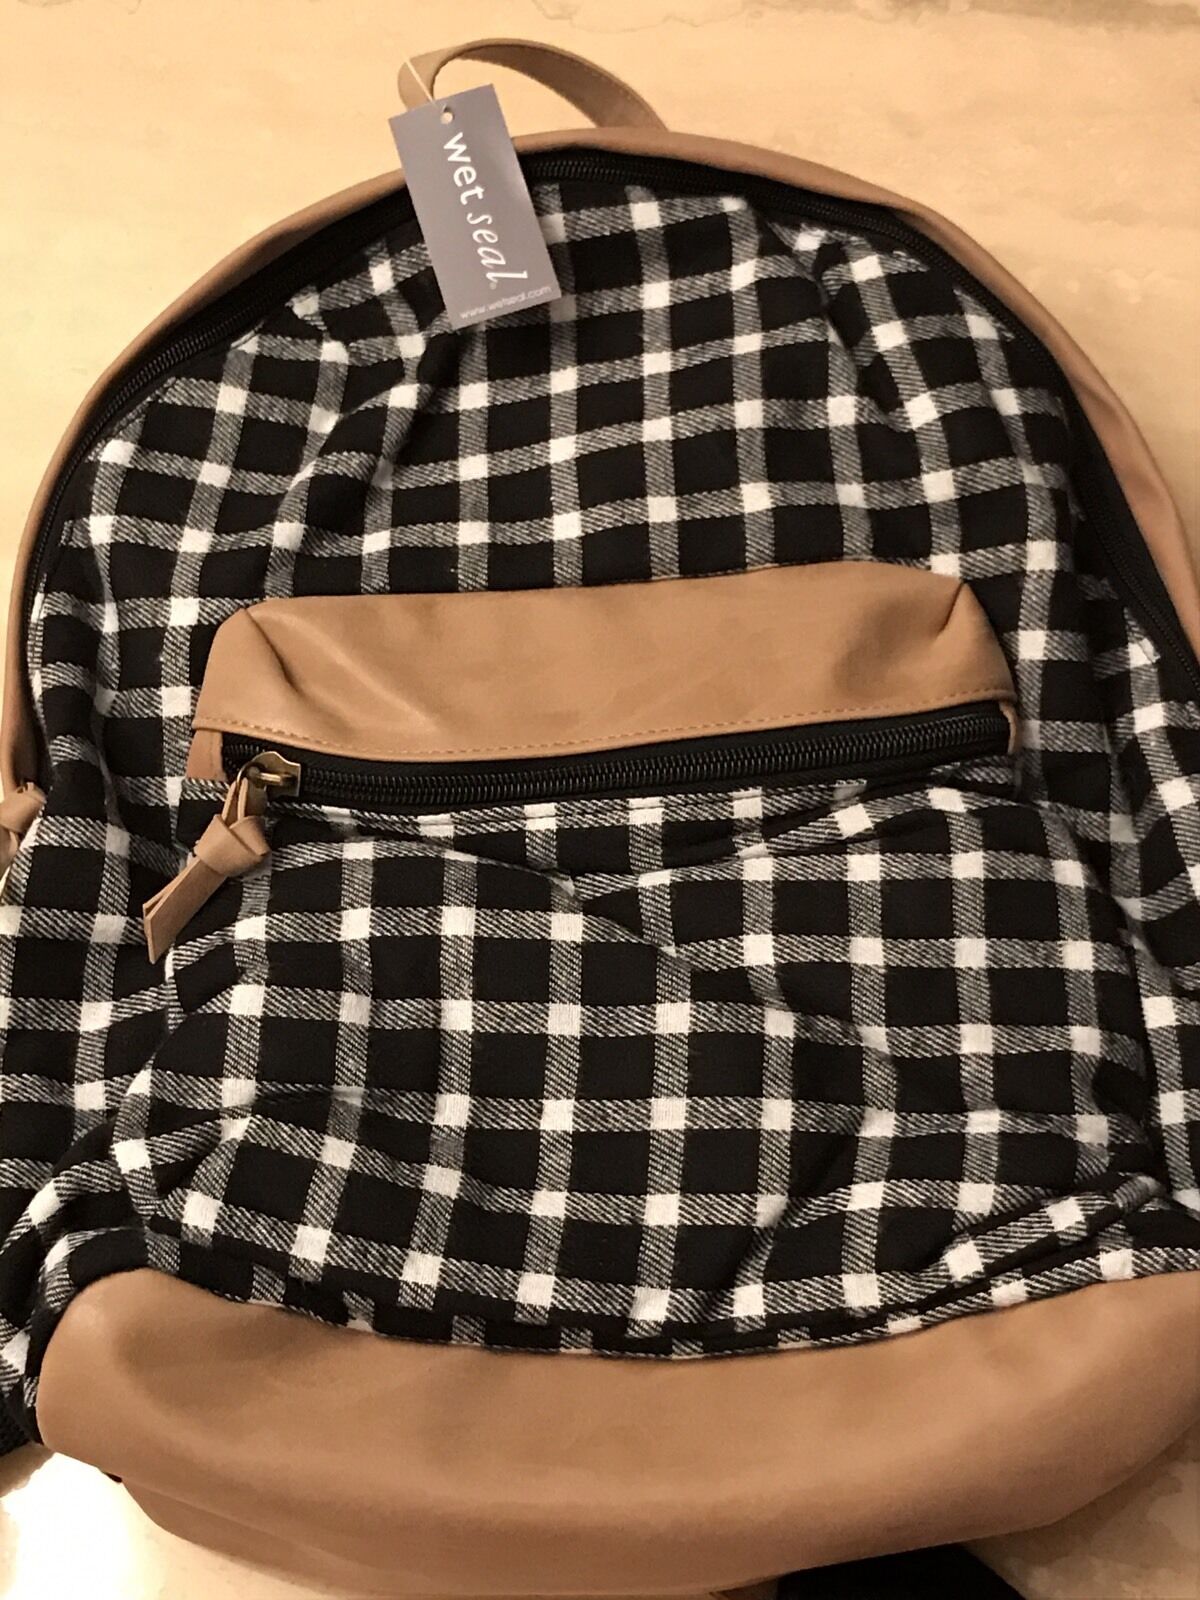 Wet Seal Backpack Brand New Fast Shipping